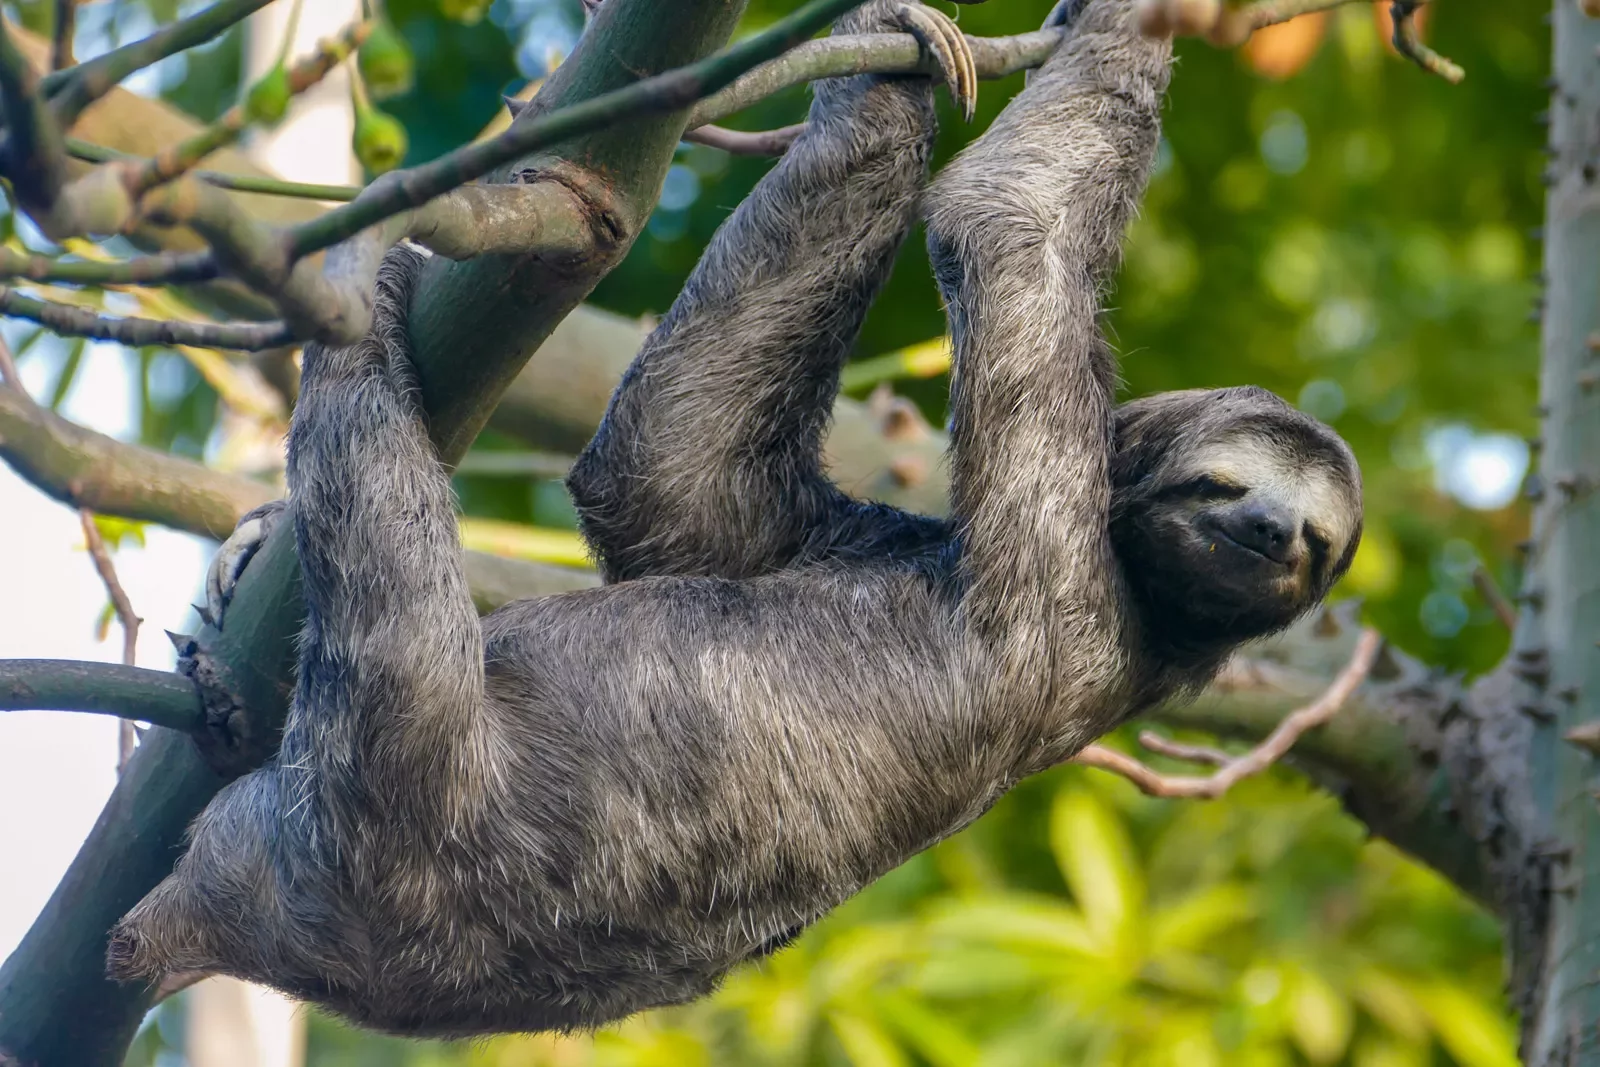 Sloth hangs from a branch